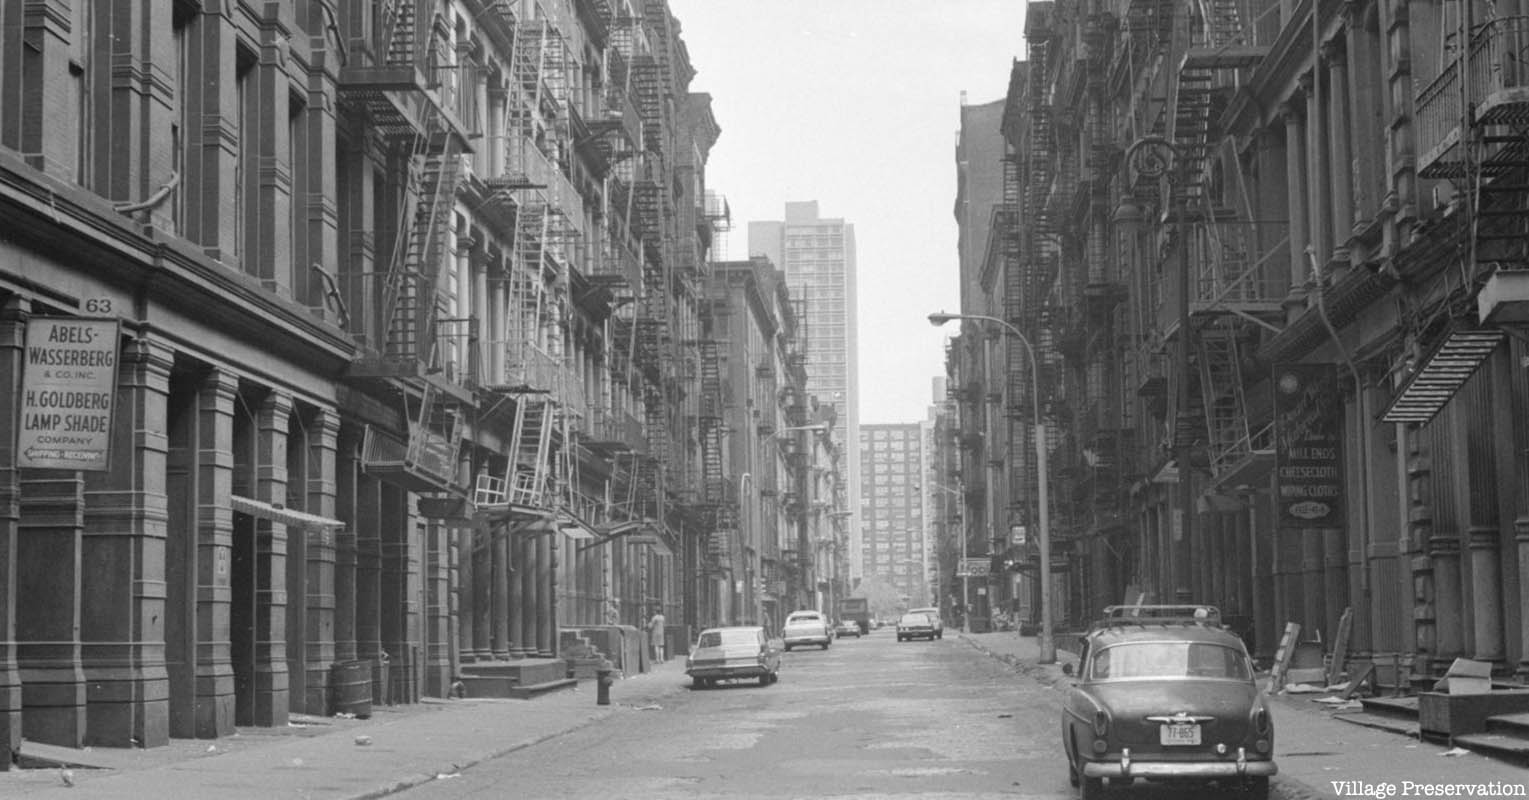 Soho Cast Iron District in 1969